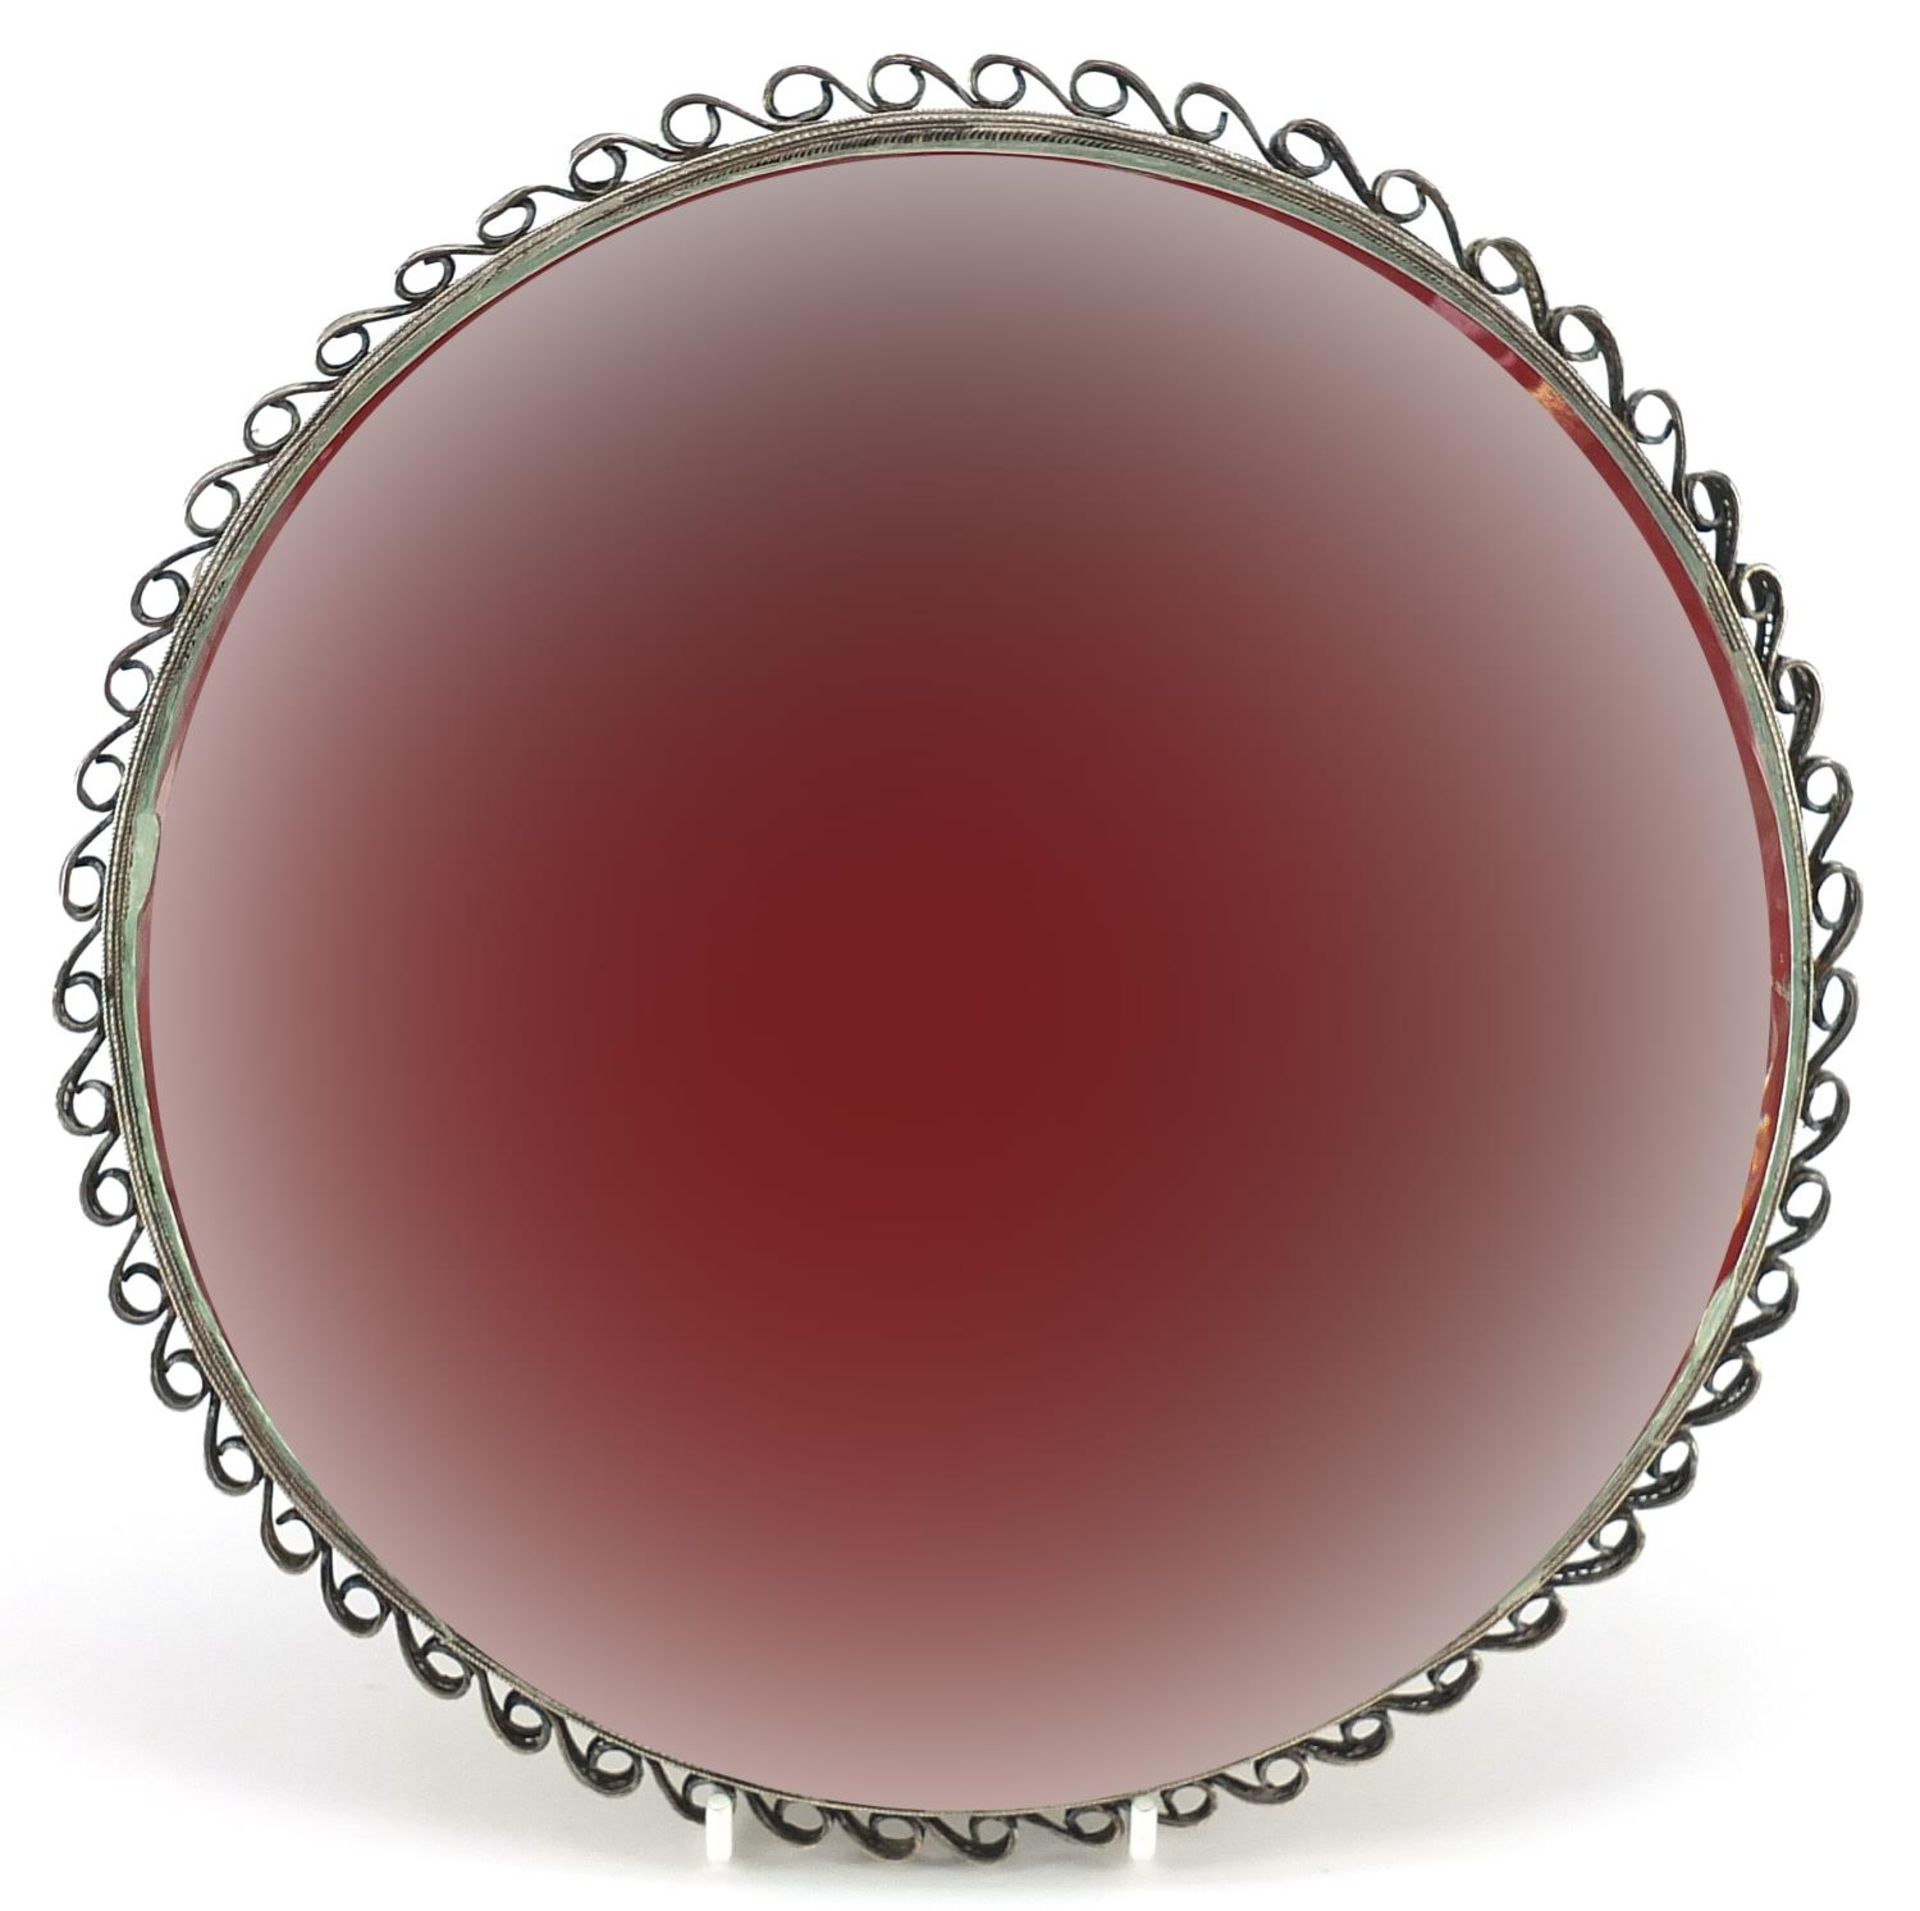 Indian Goa silver filigree mirror with bevelled glass, 23.5cm cm in diameter